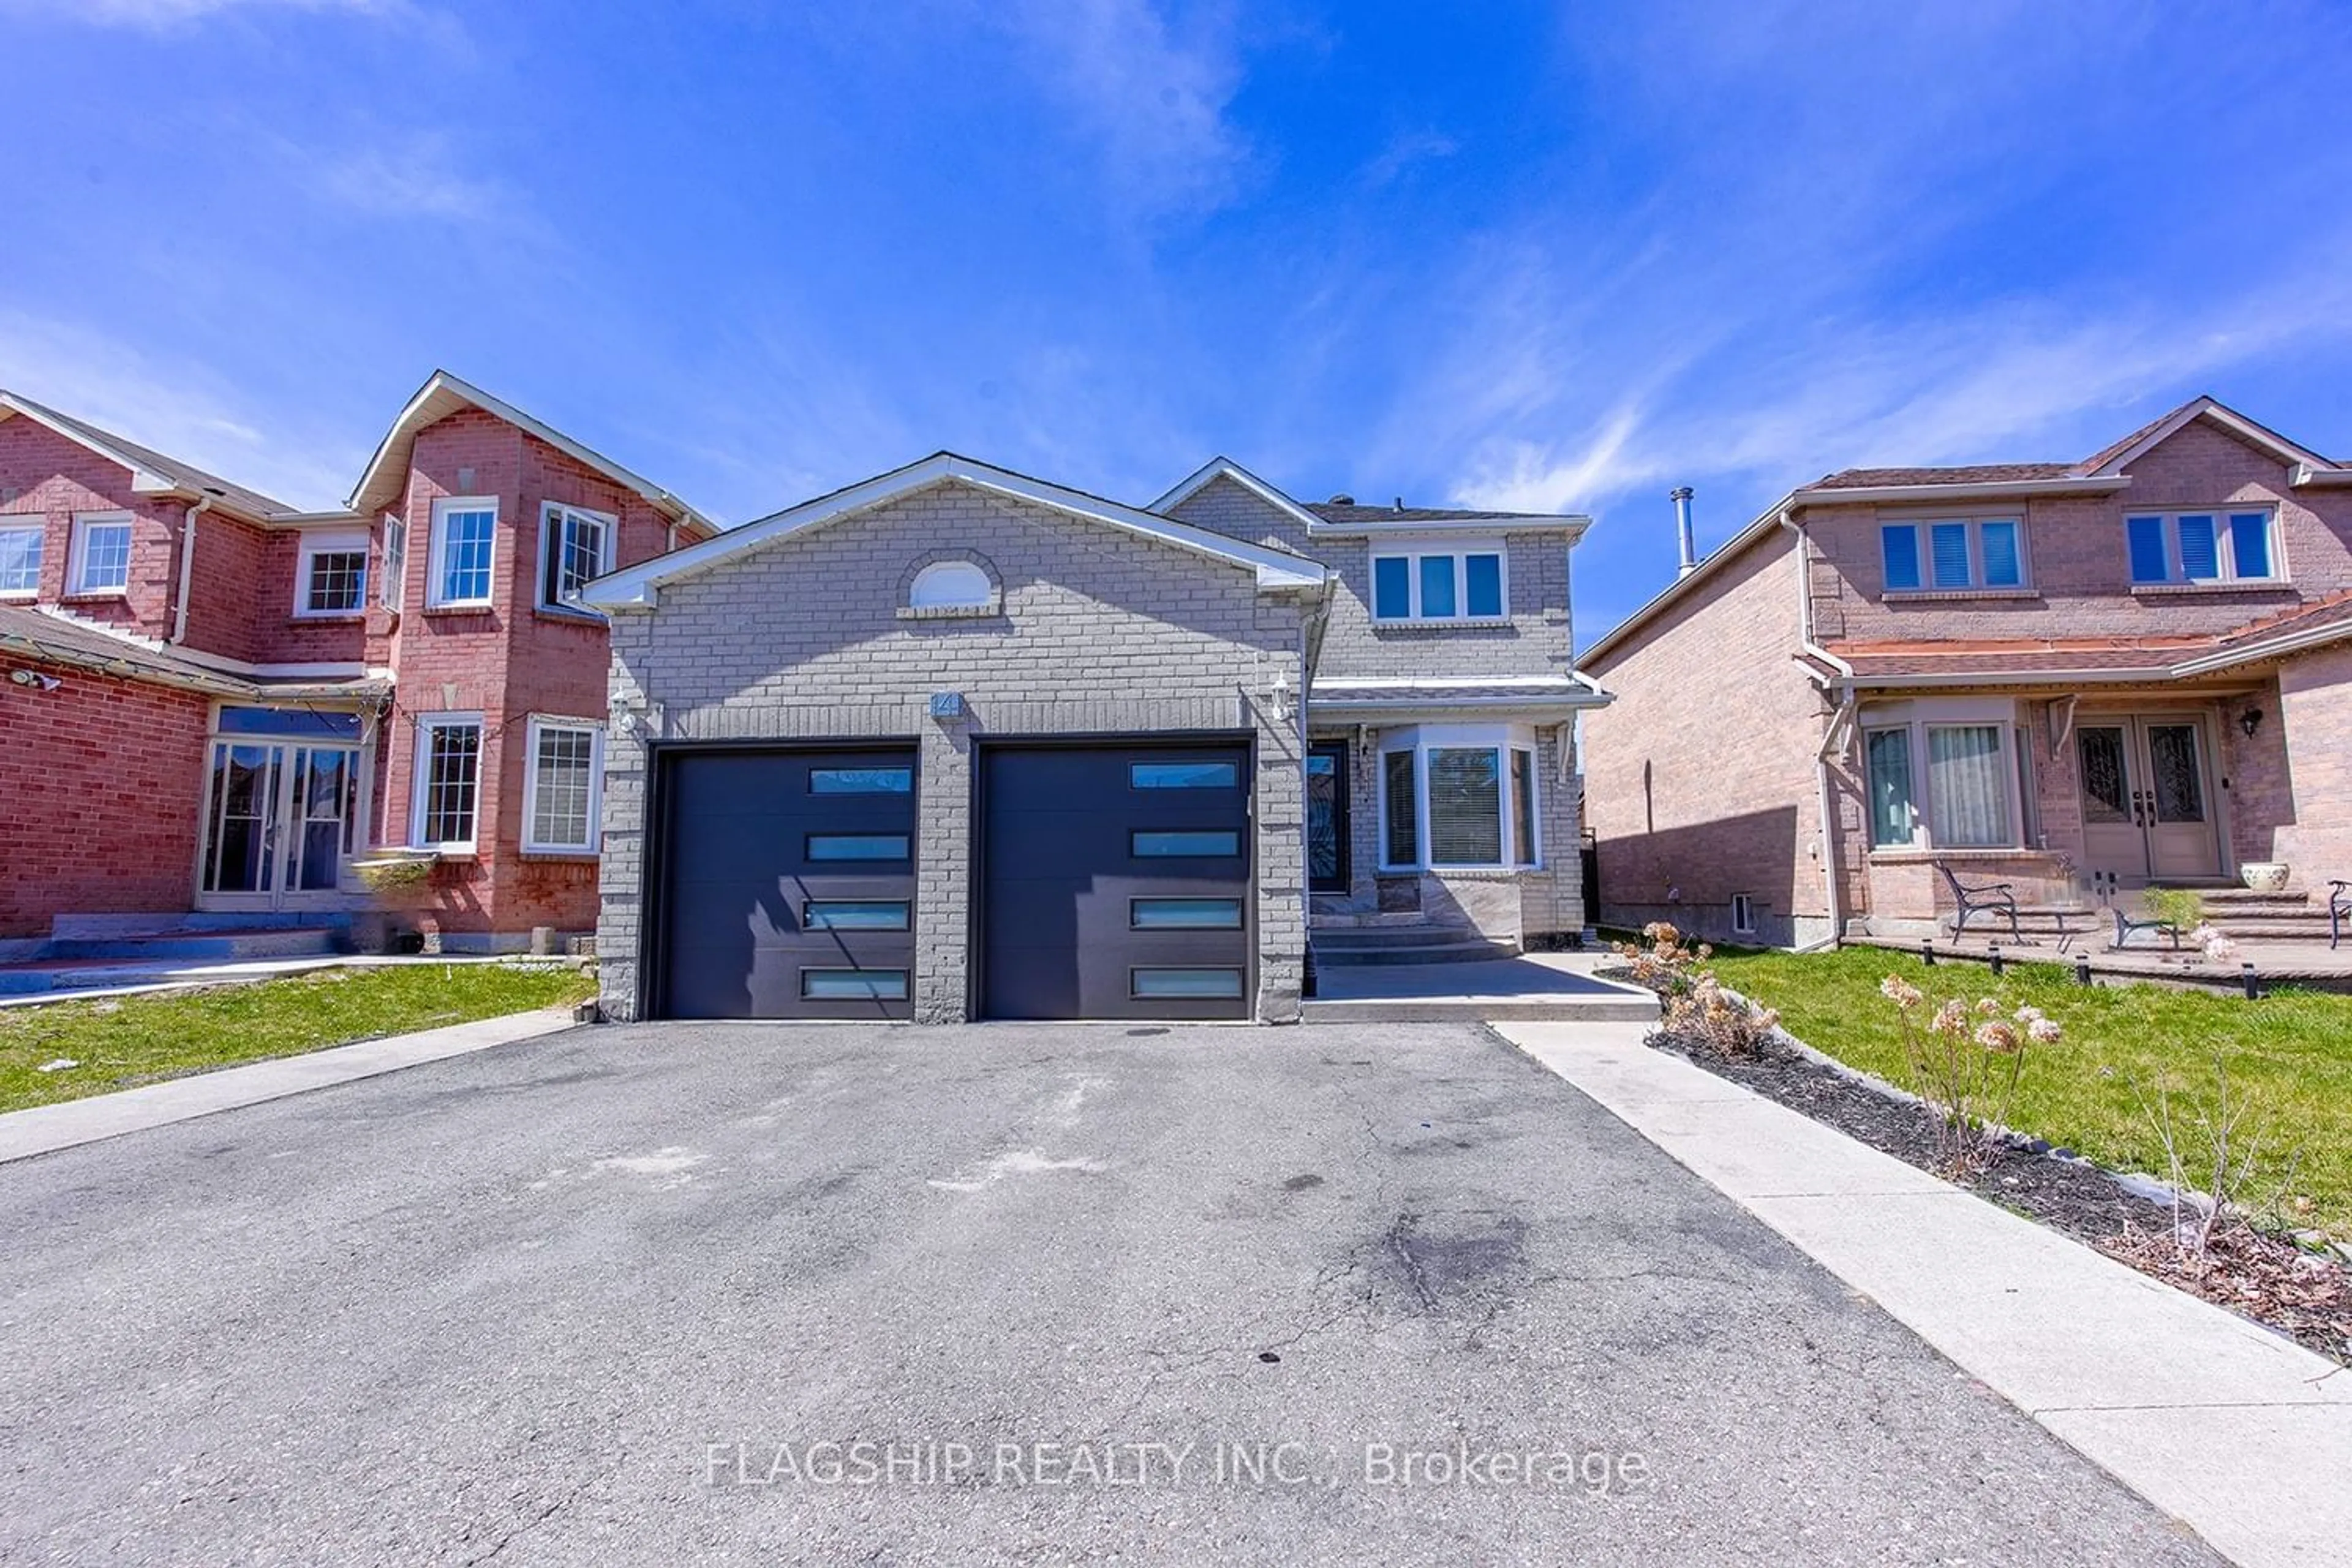 Frontside or backside of a home for 14 Songsparrow Dr, Brampton Ontario L6Y 3Z8